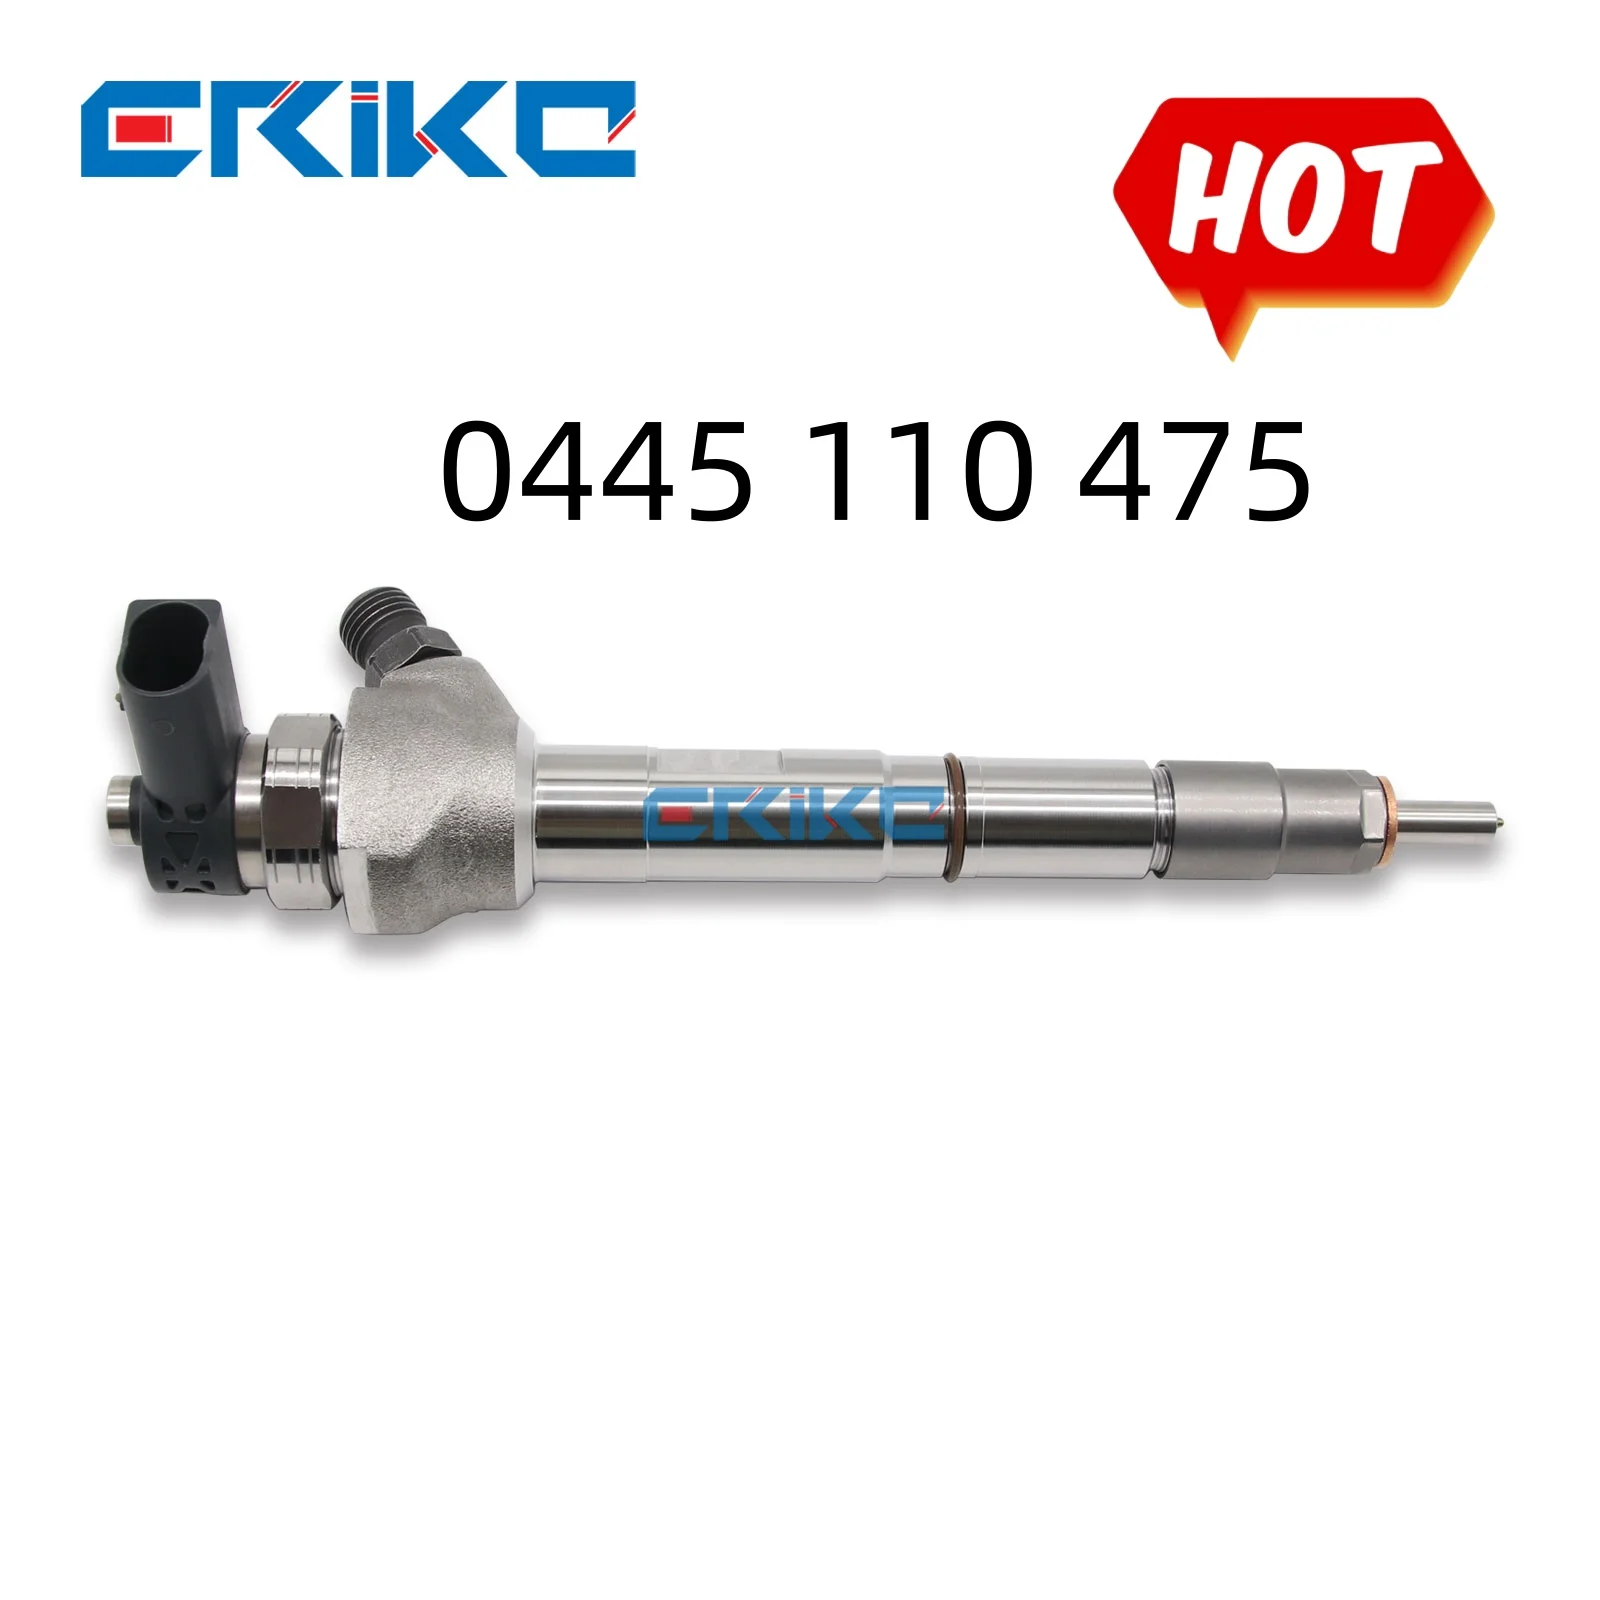 

ERIKC Valve of Injector 0445110475 Common Rail Injector Nozzle Assembly 0 445 110 475 Fuel Injection 0445 110 475